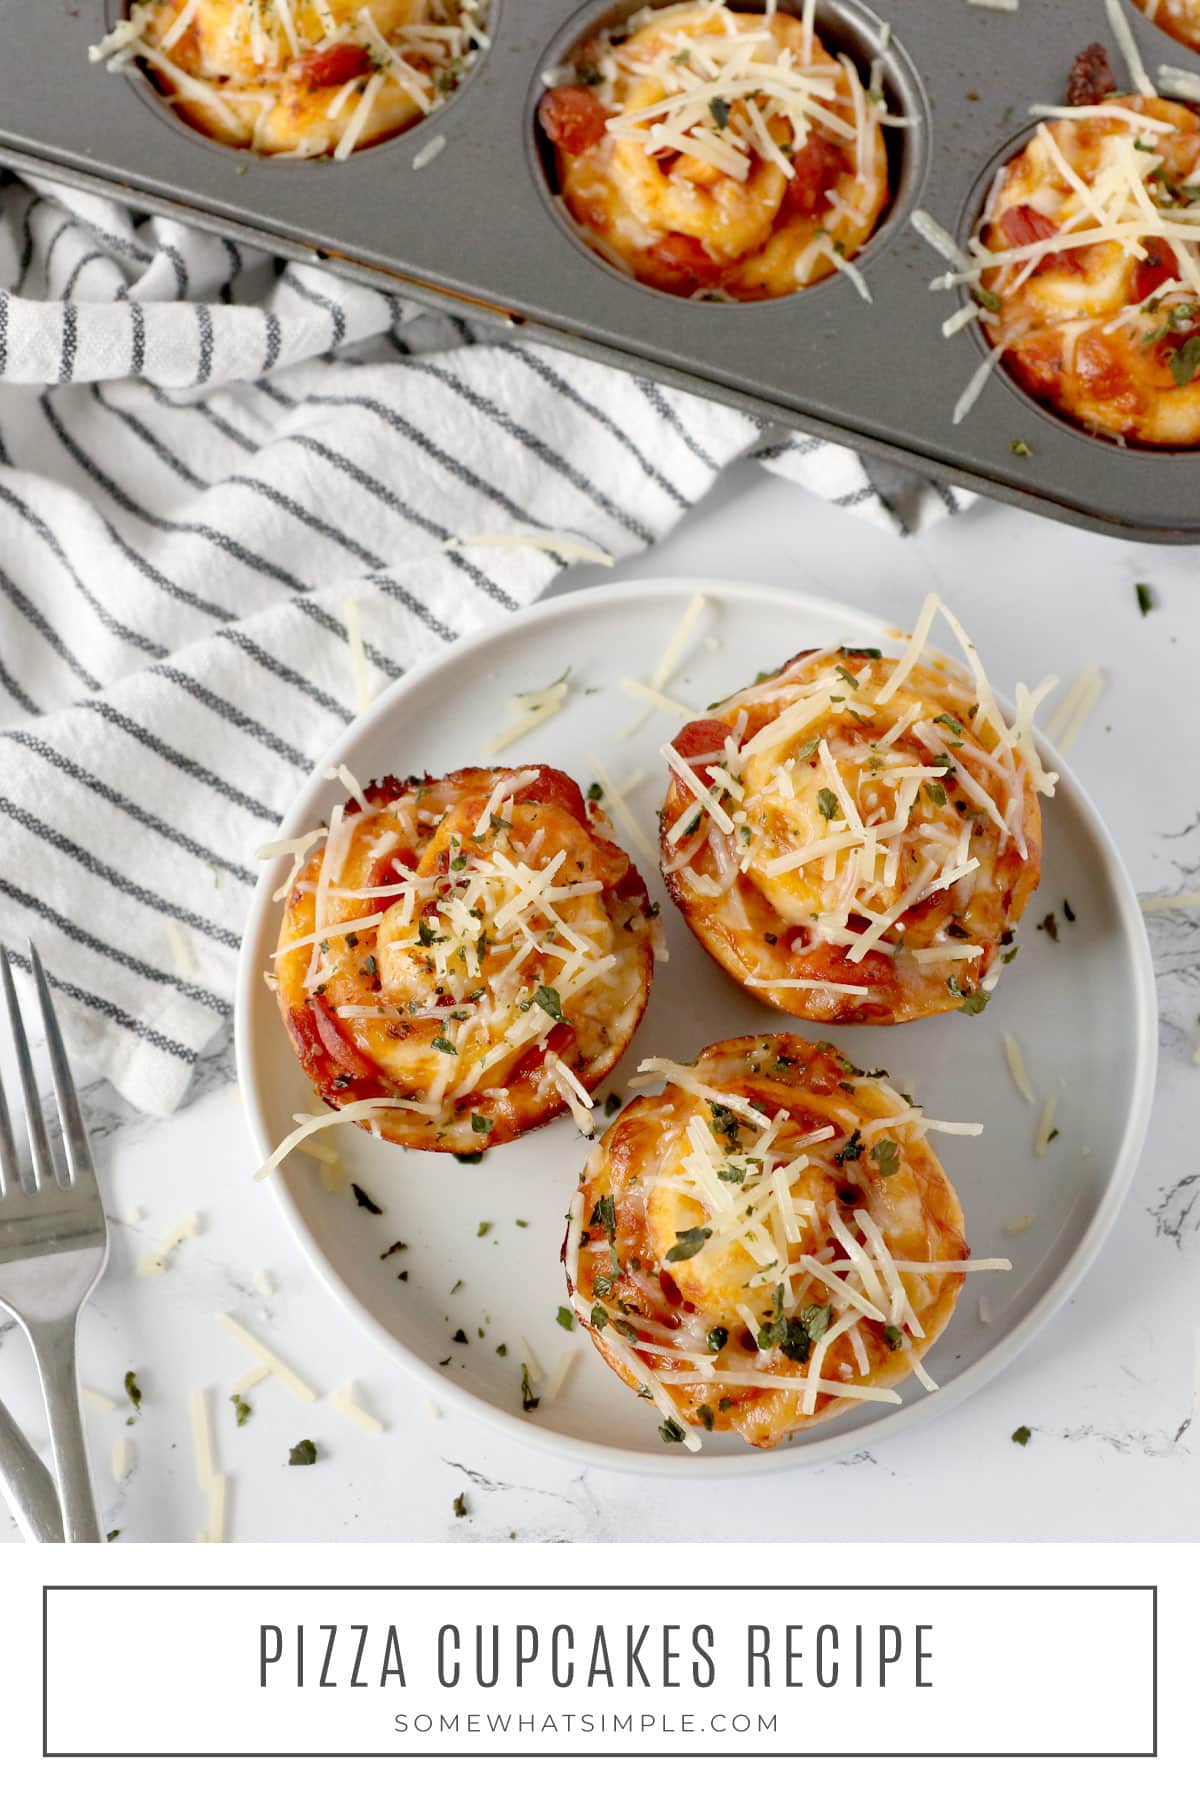 Muffin Tin Pizzas + Other Muffin Tin Dinner Ideas